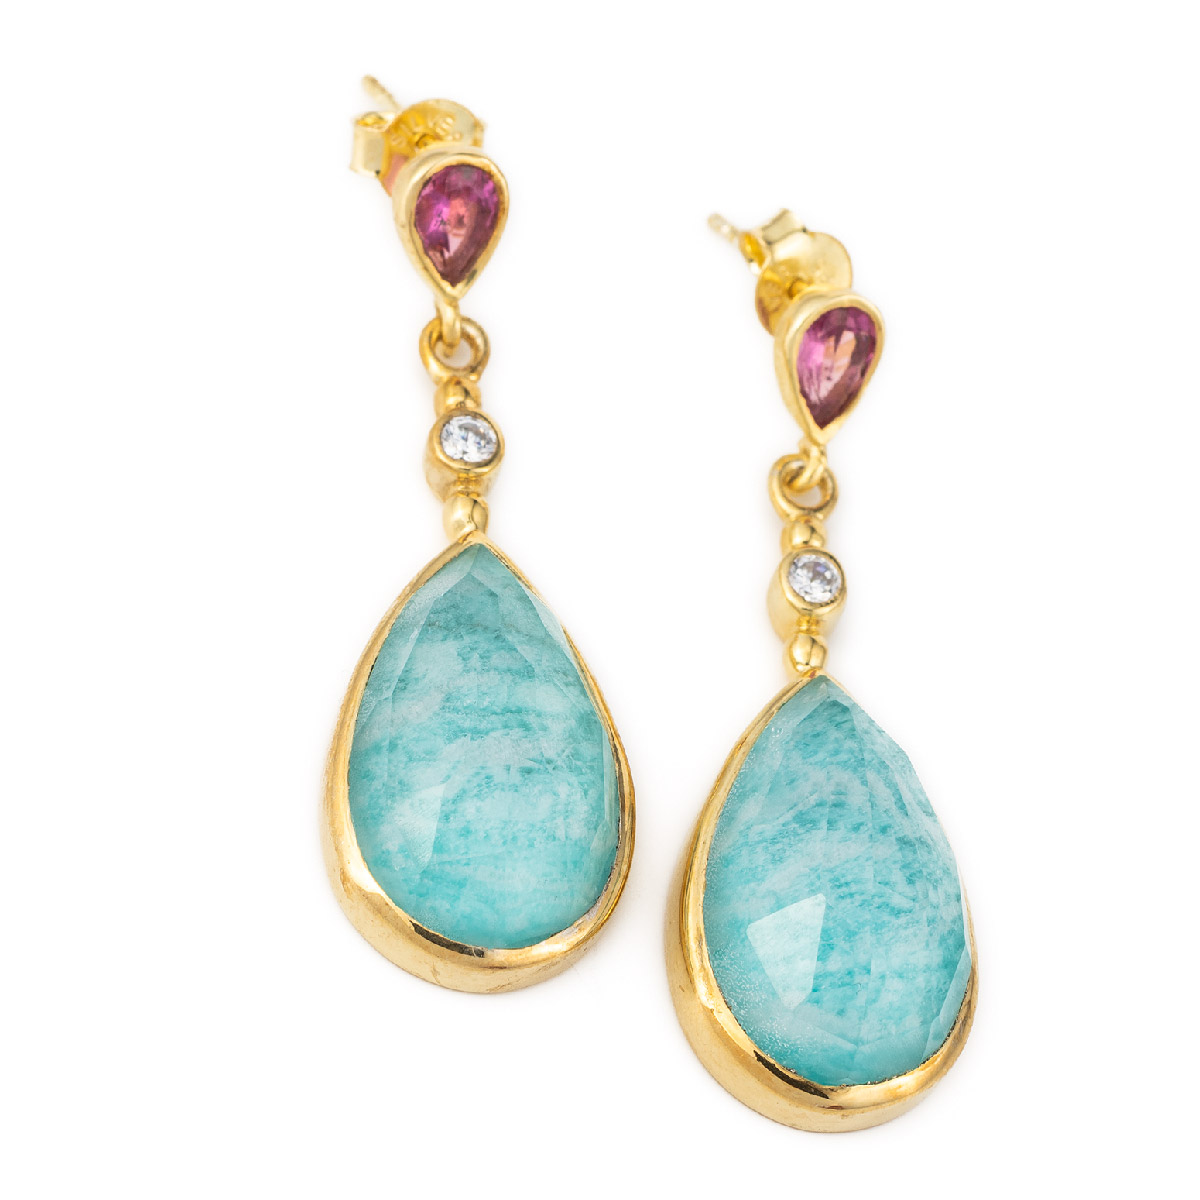 Amazonite and Ruby Doublet Earrings - Sterling Silver and Gold Plated